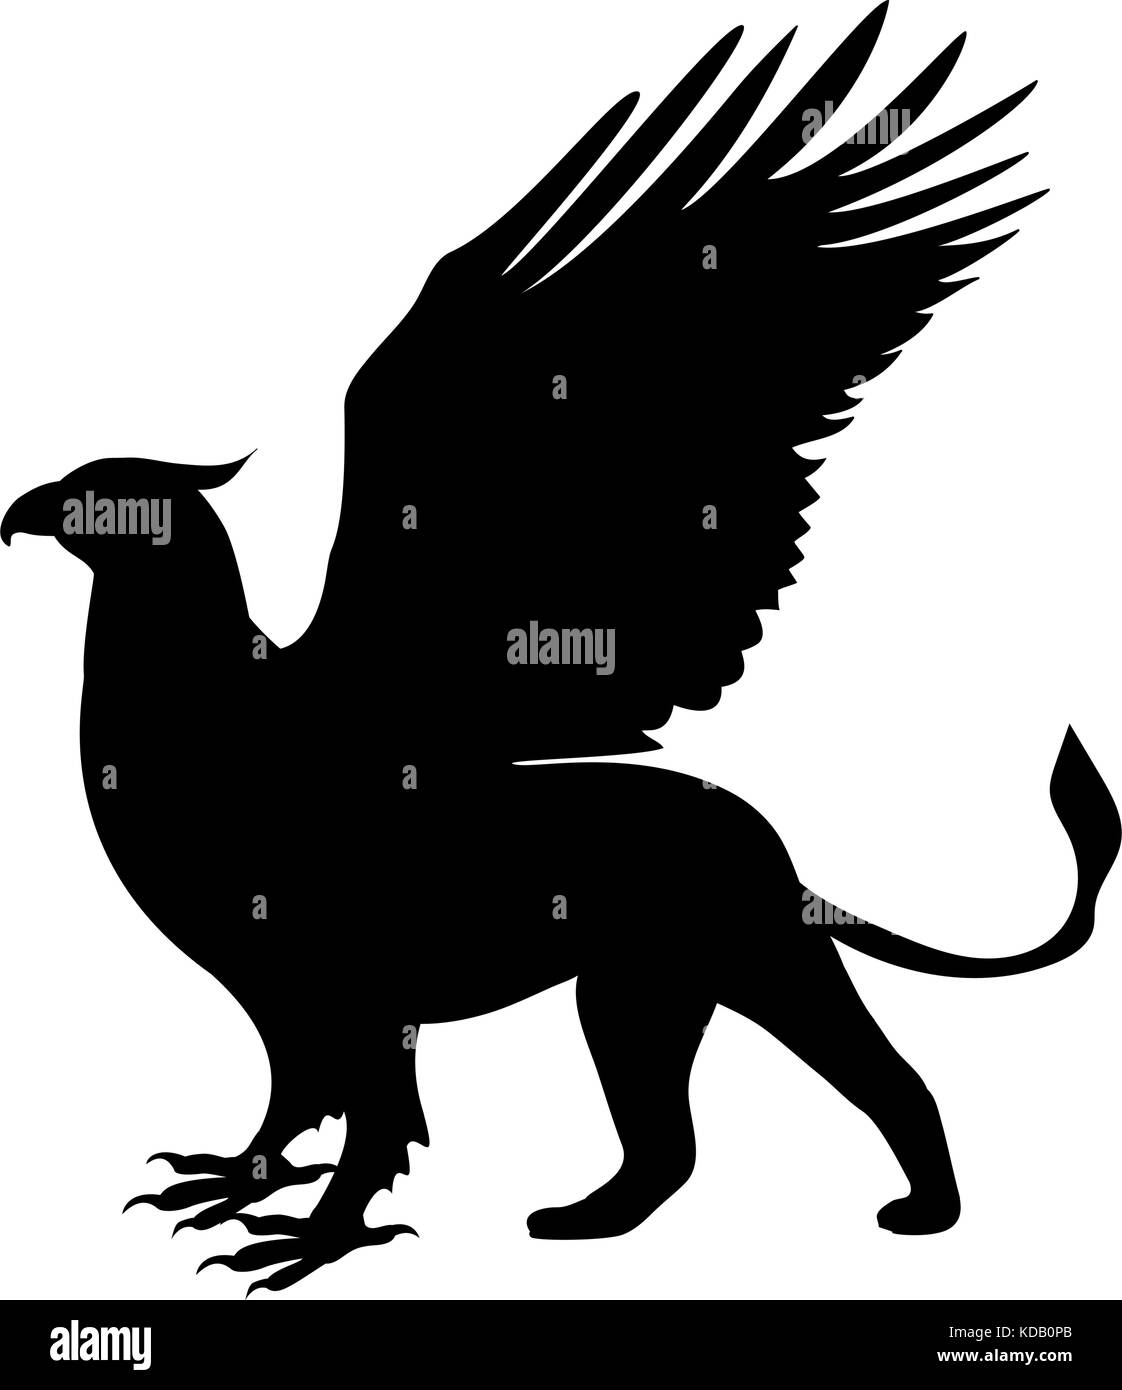 Griffin silhouette ancient mythology fantasy. Vector illustration. Stock Vector